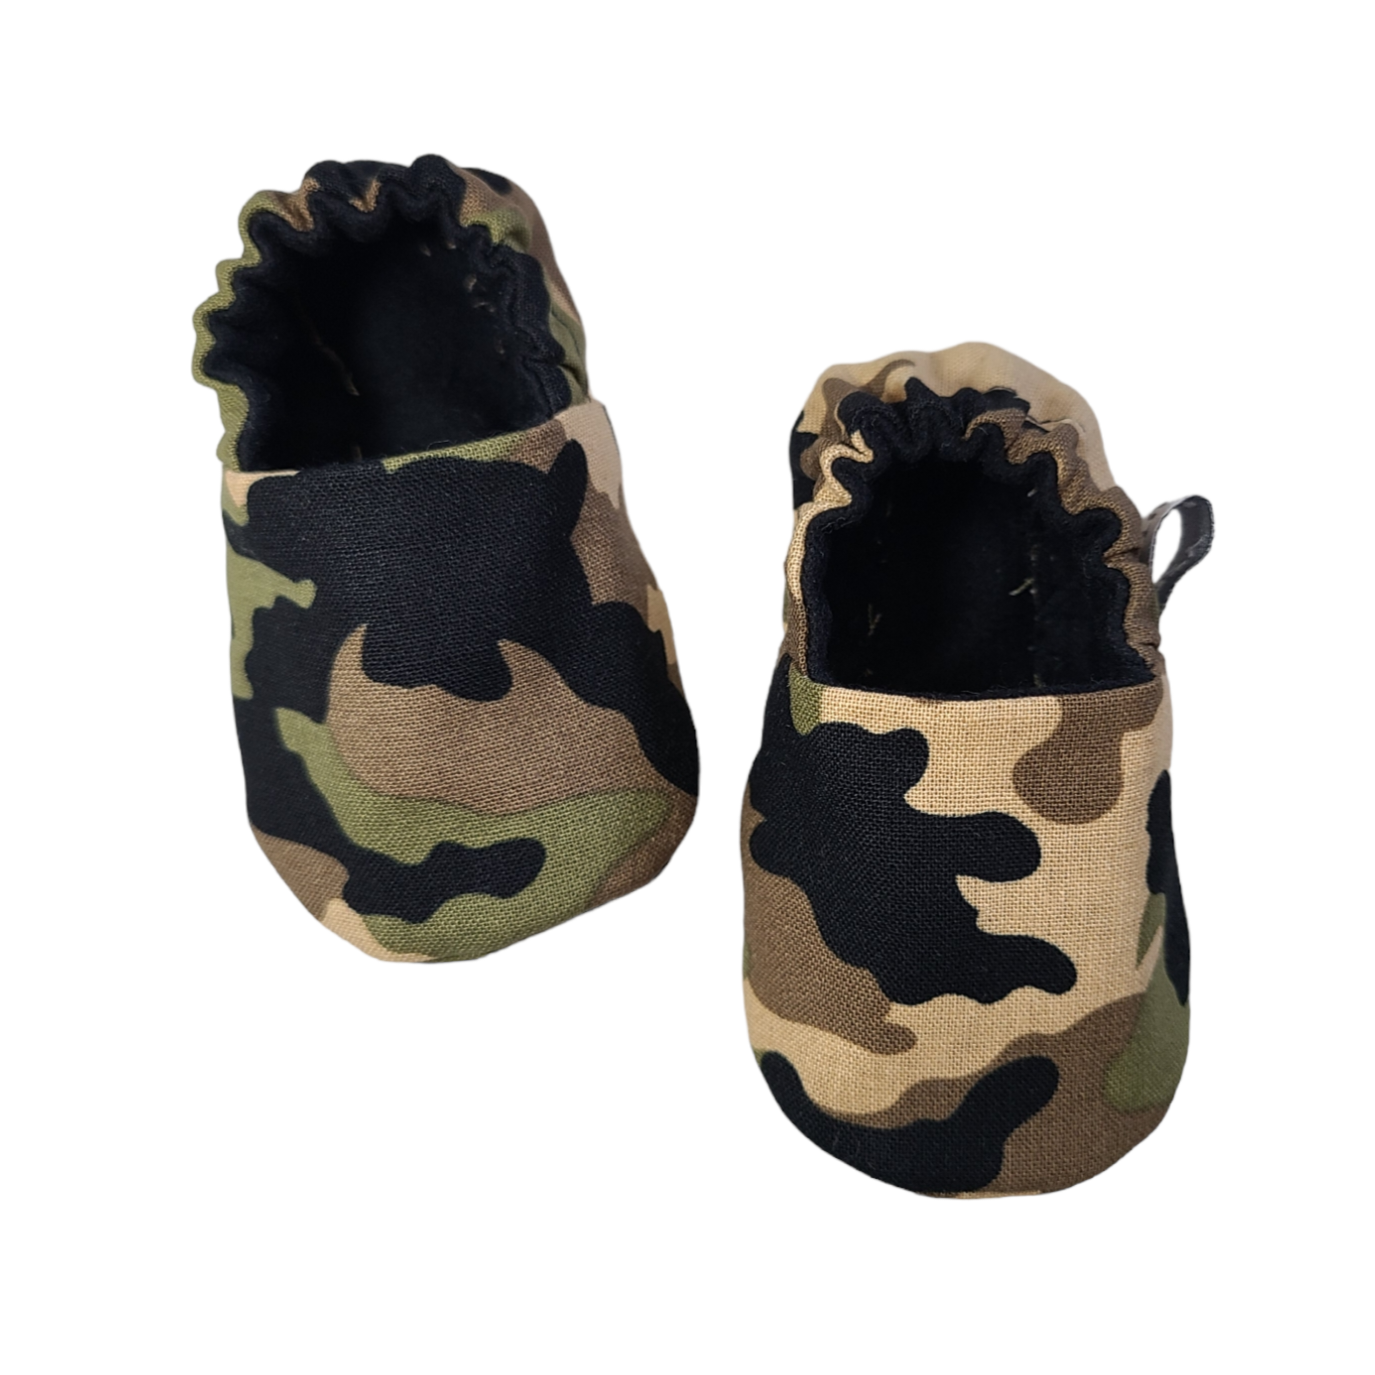 Army Baby Booties, Green Camo Baby Slippers, Camo Baby Crib Shoes, Army Baby Moccs, Army Camo Green Slippers, Camo Booties